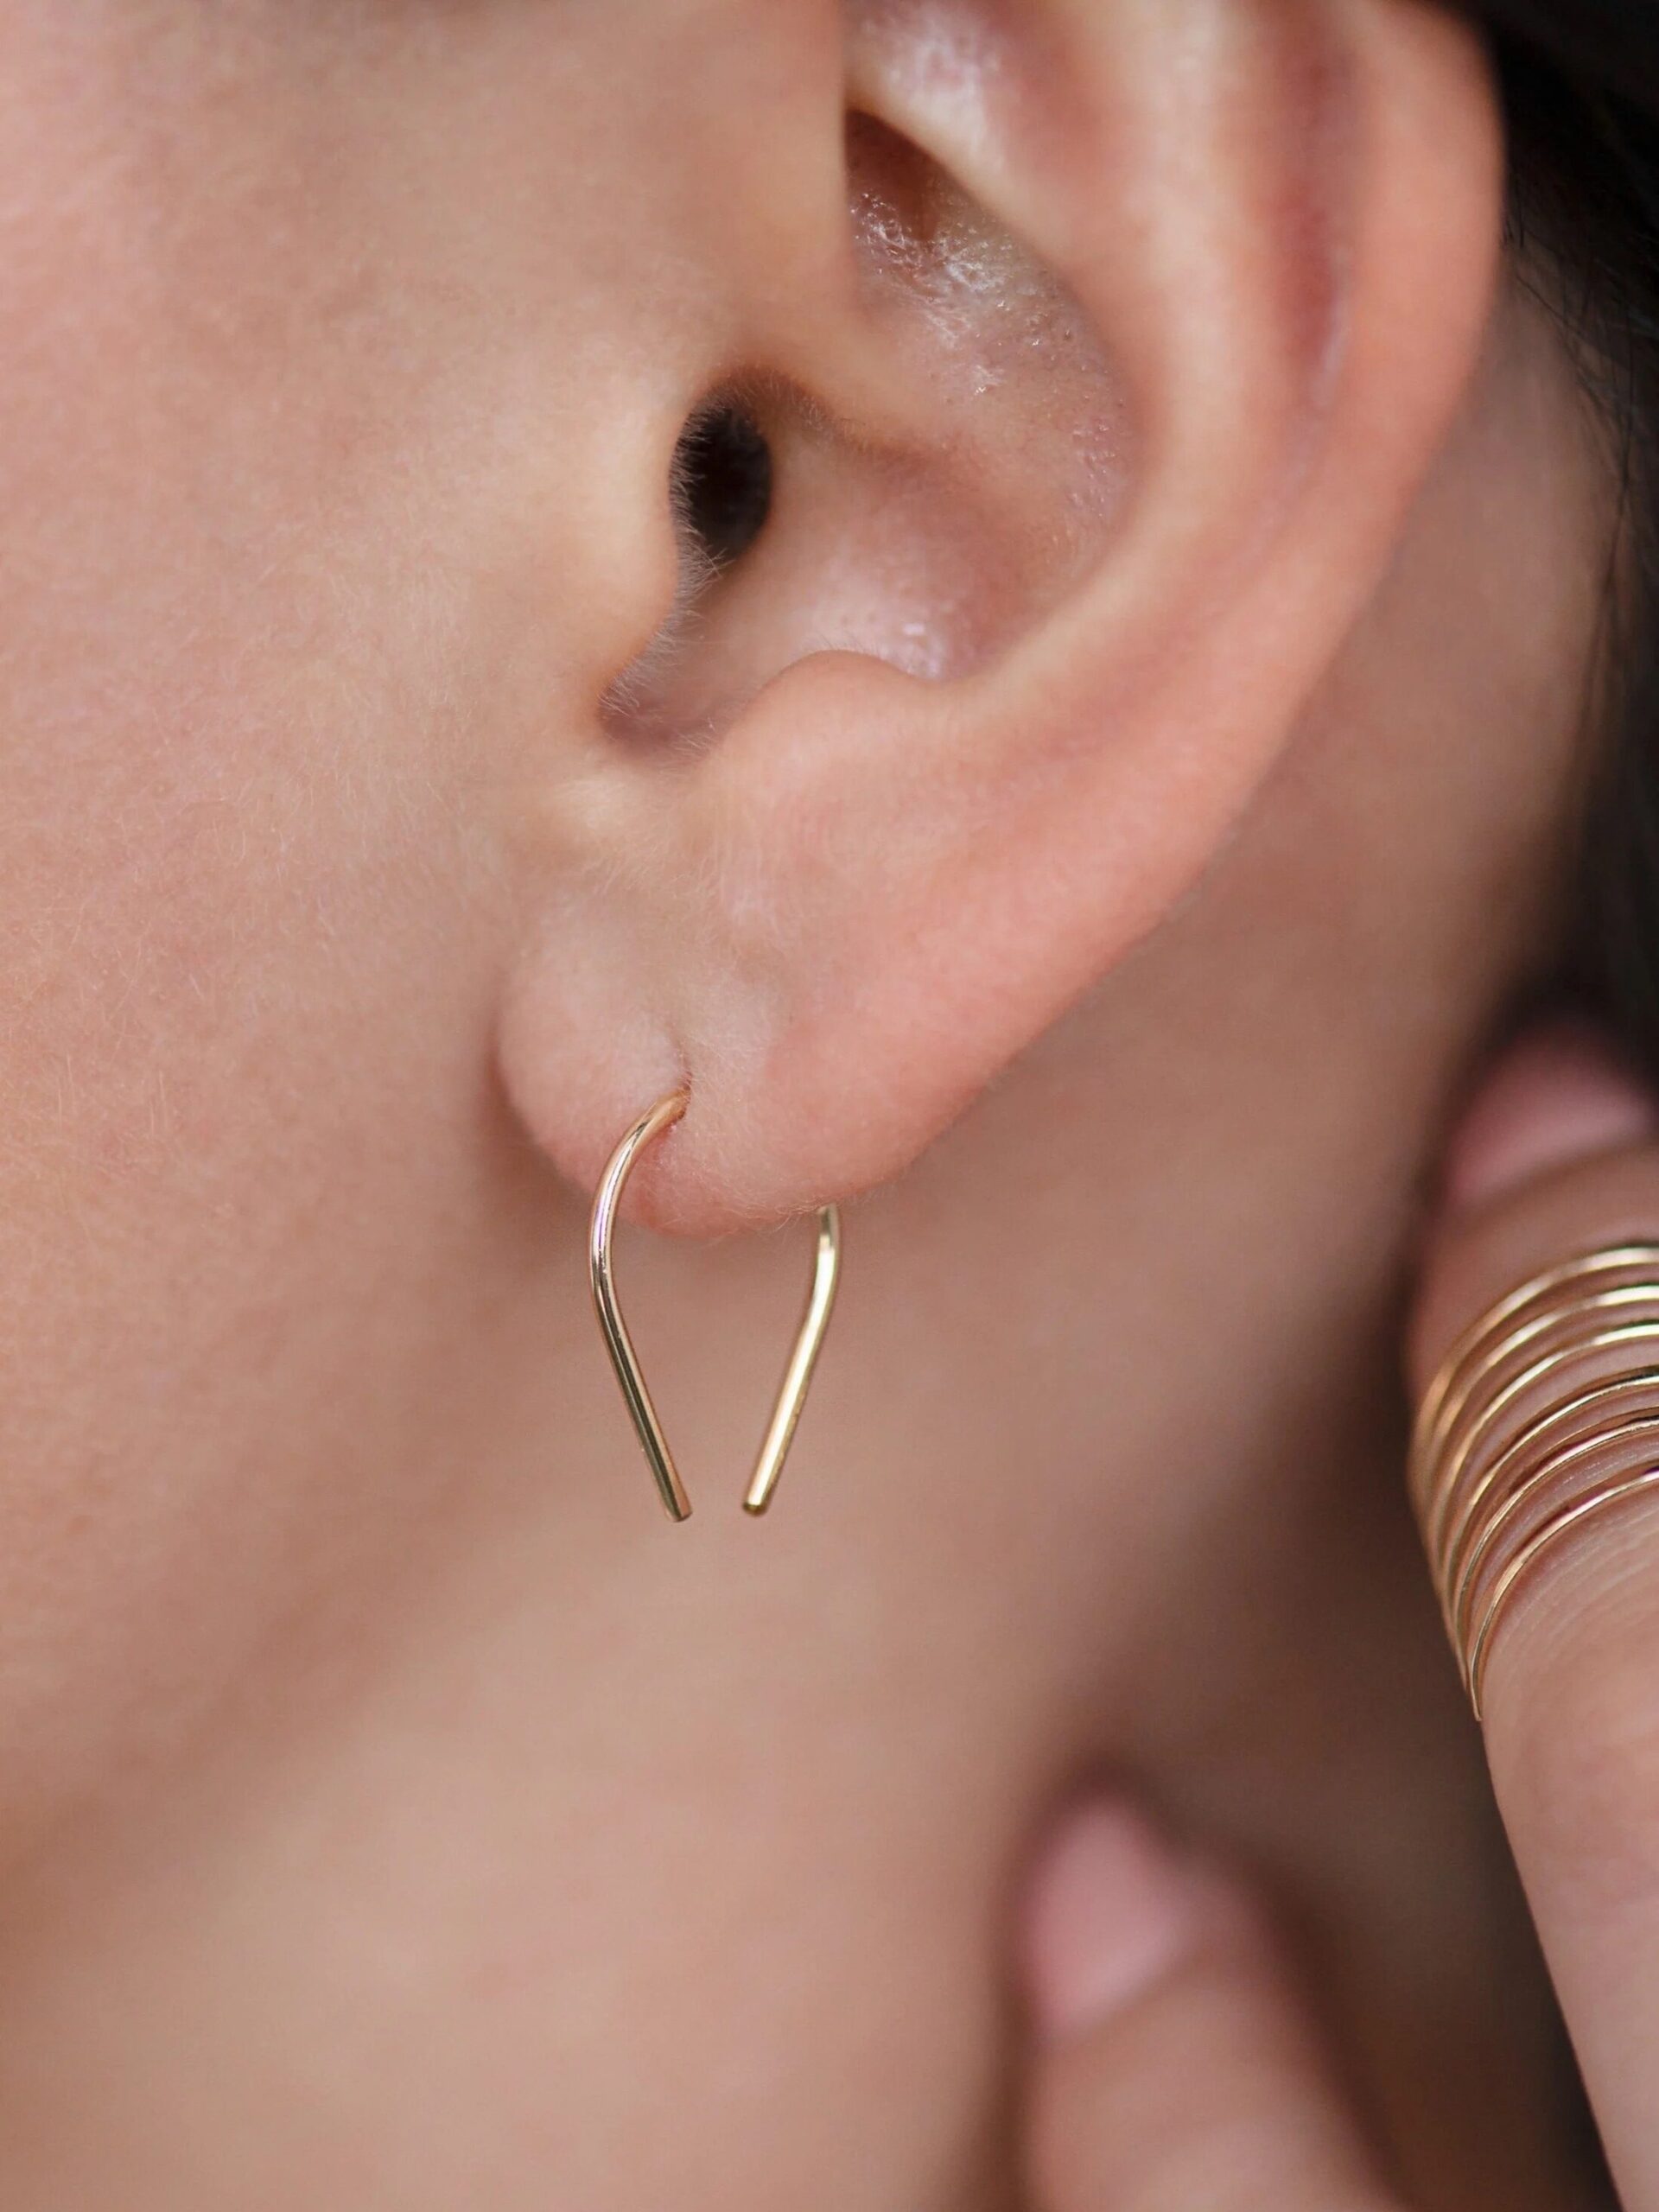 Close-up of a woman's ear wearing a simple gold hoop earring, with a focus on elegant jewelry and subtle makeup.